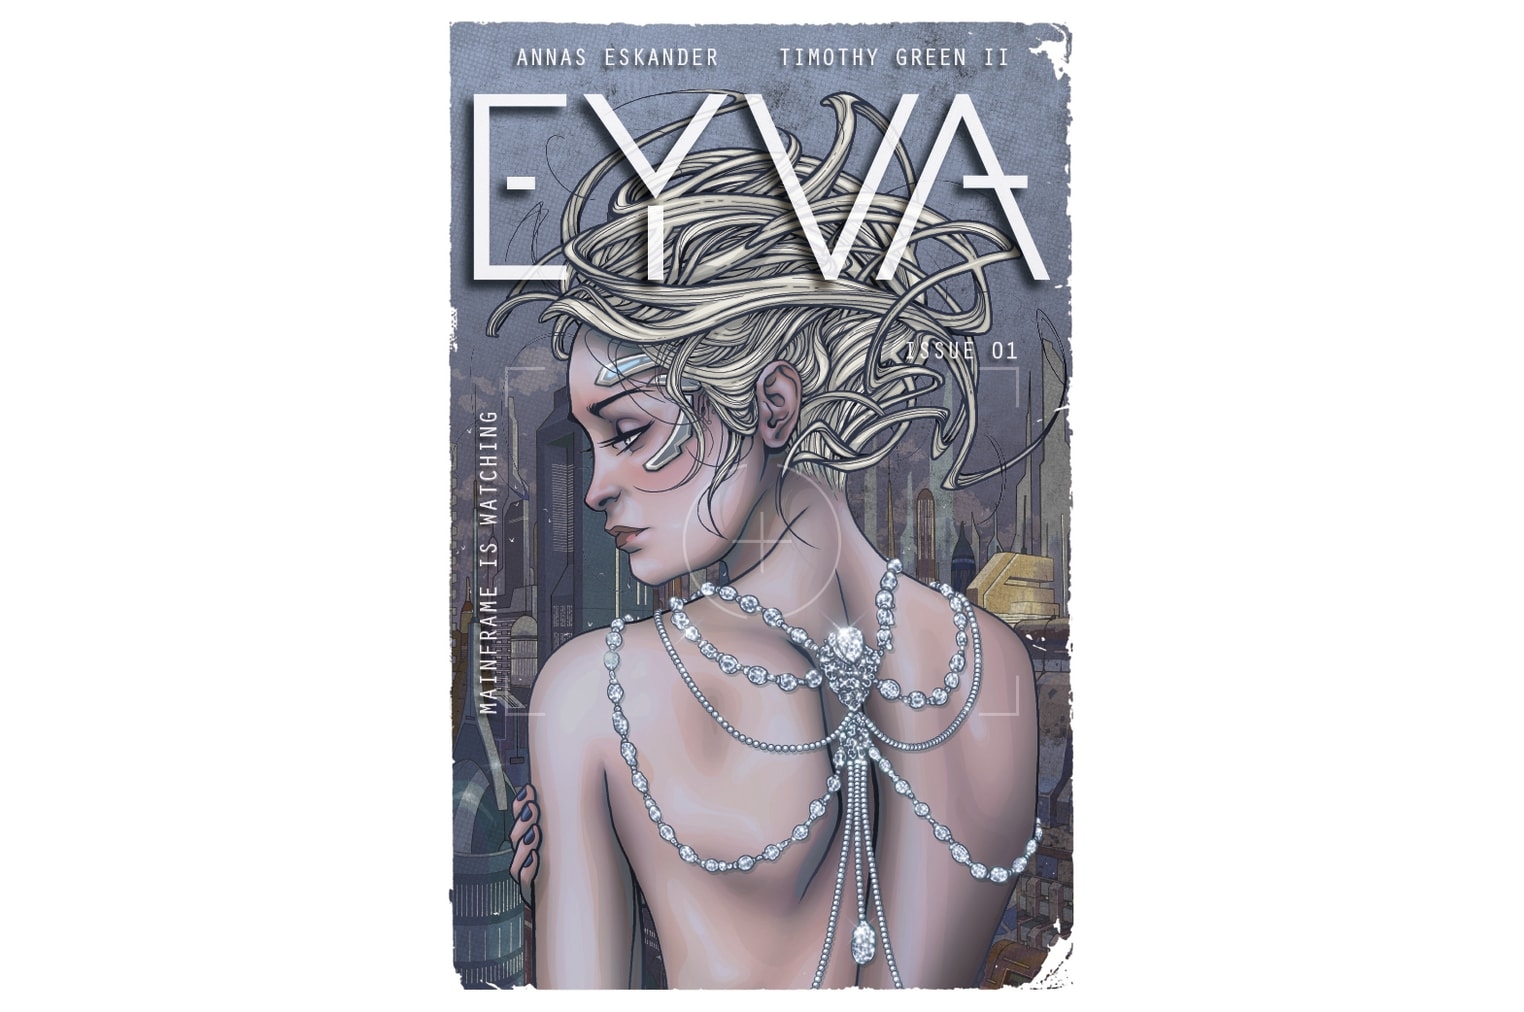 From THE COMiX NEWS WIRE NEWS ROOM:: EYVA has run away with our Hearts and Funding off of her IndieGoGo